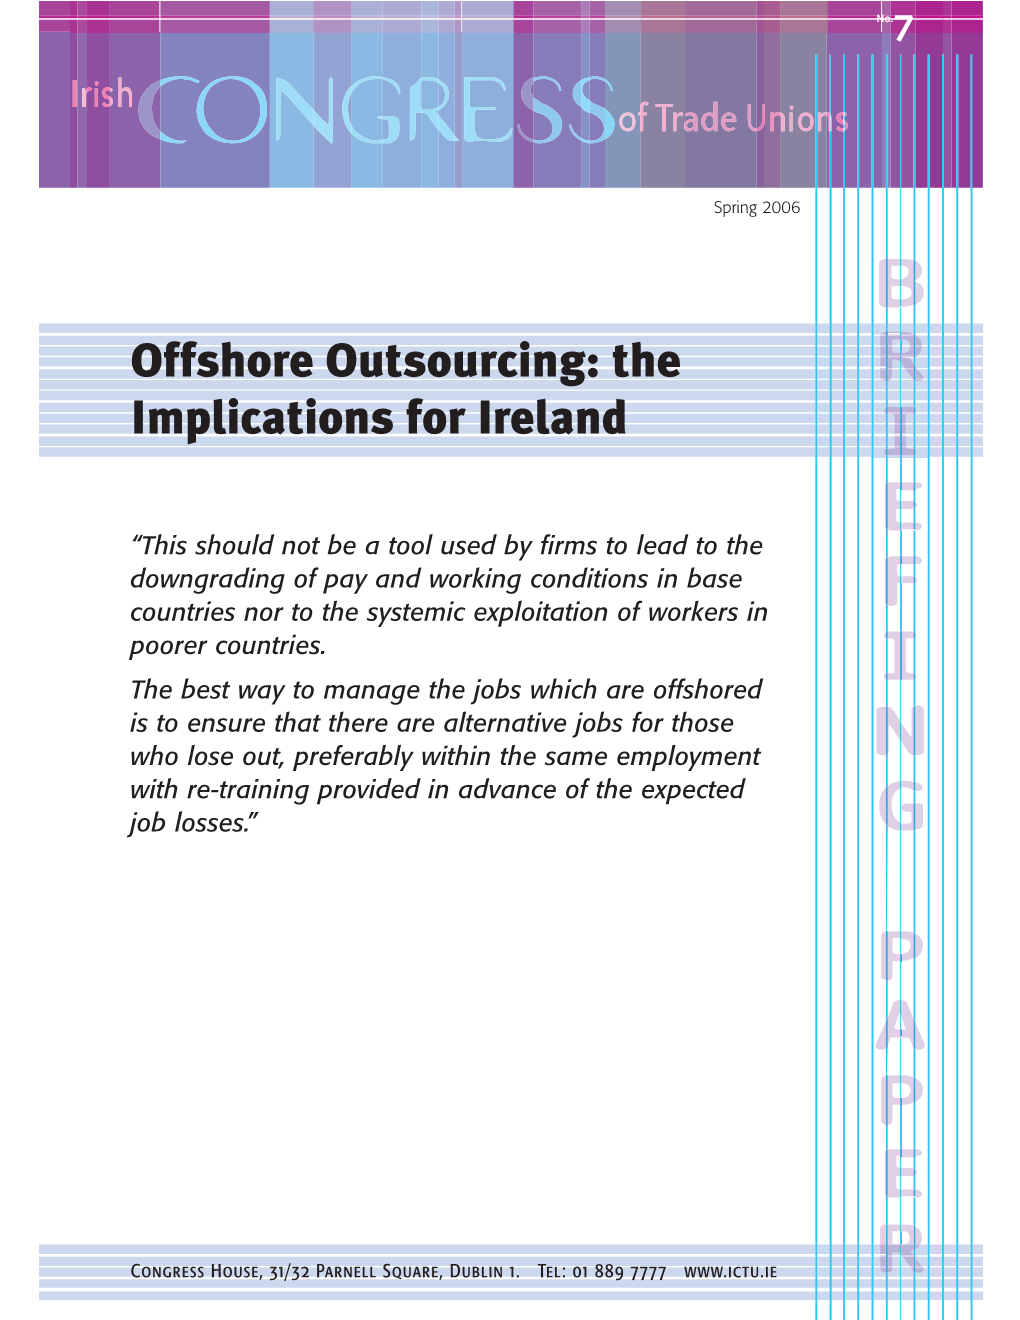 Offshoring 3